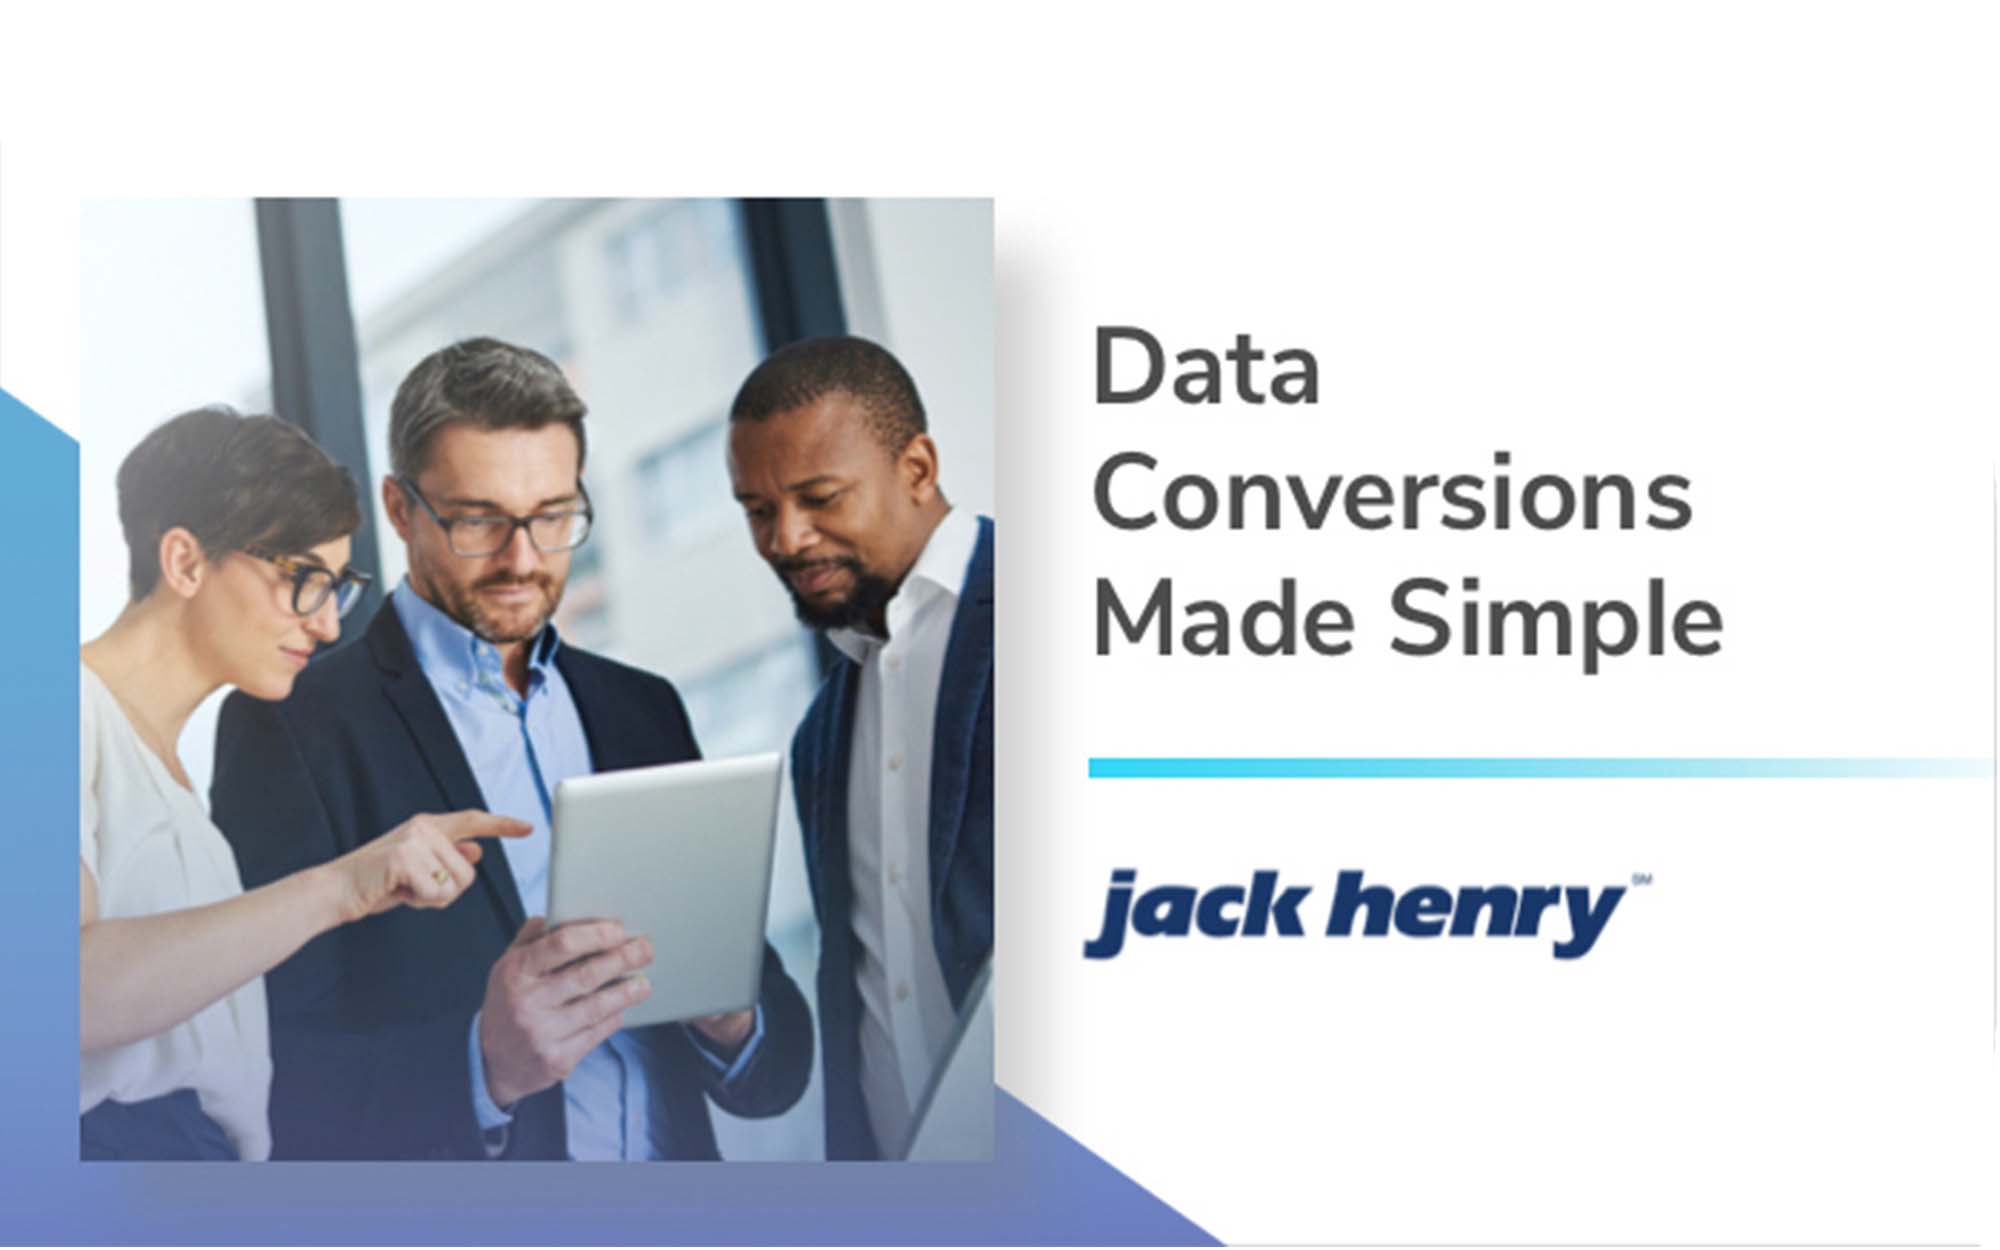 Data Conversions Made Simple